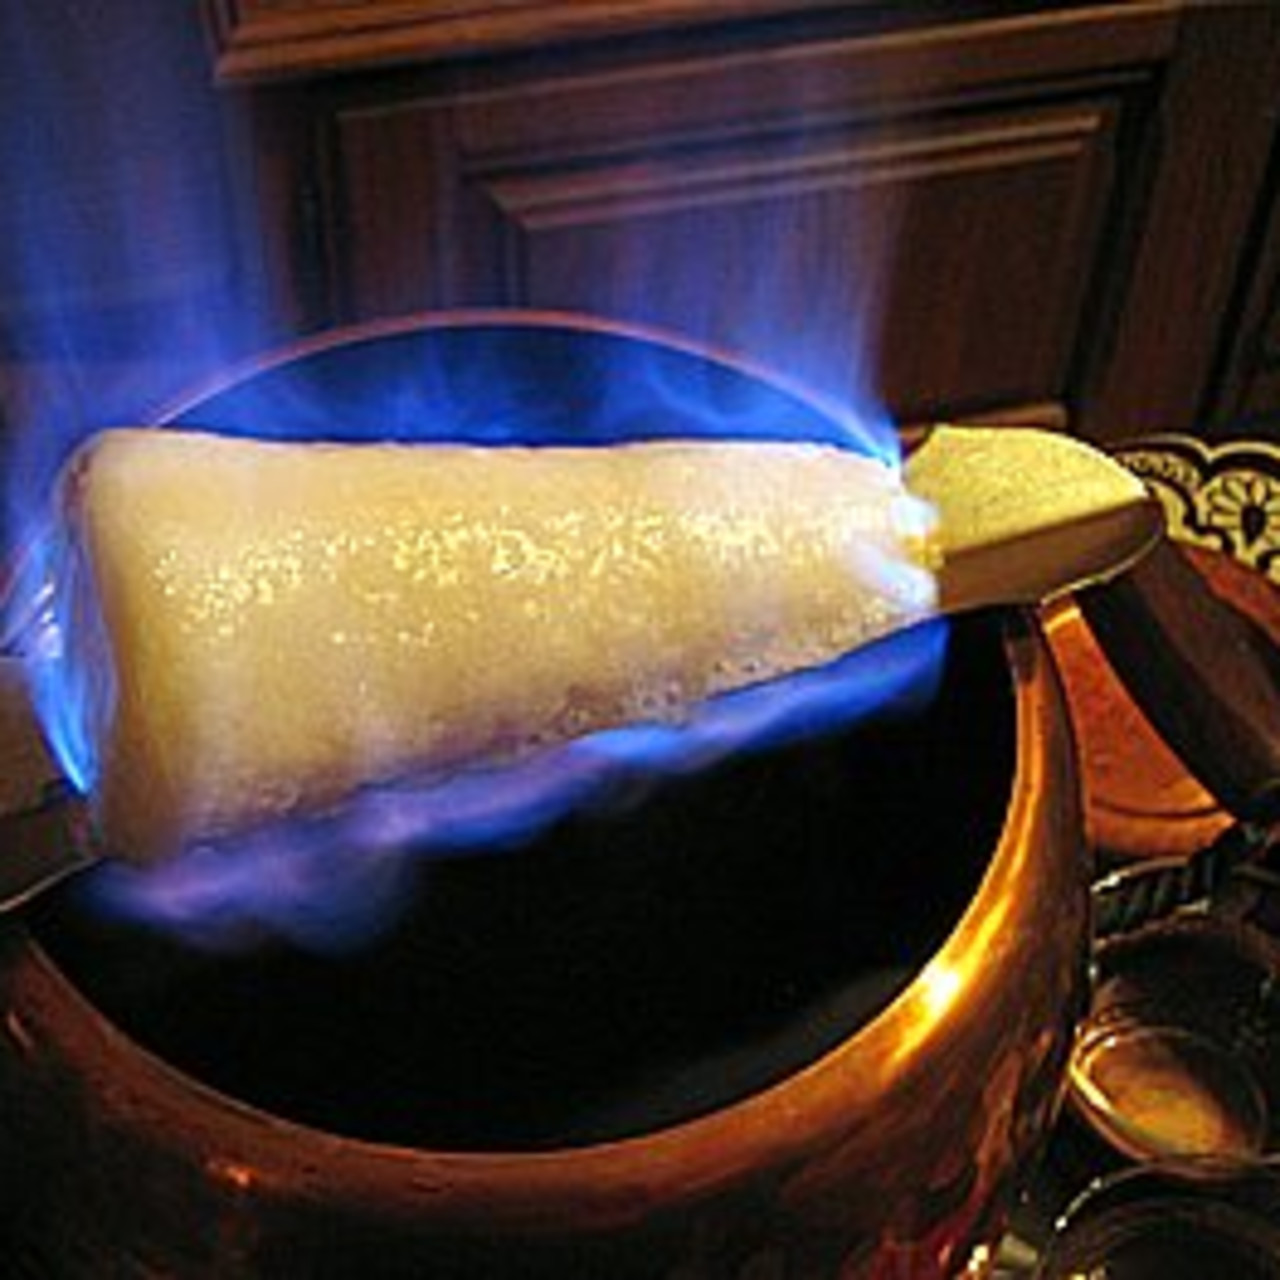 German Feuerzangenbowle - Holiday Fire Punch • Drink